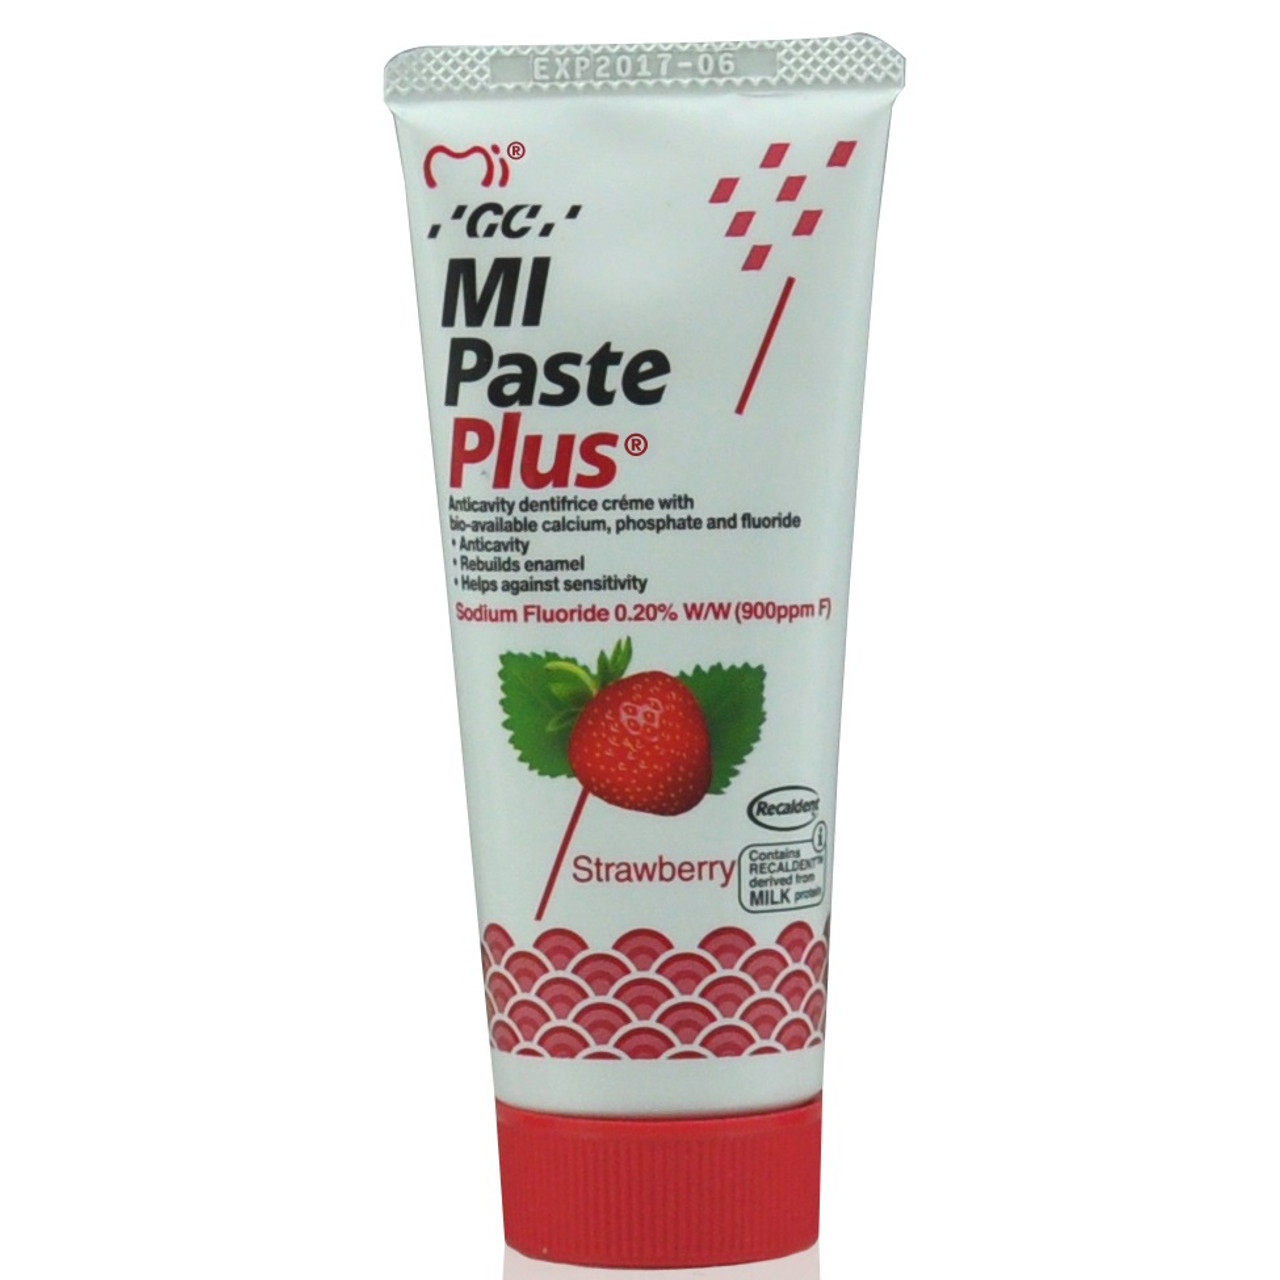 MI Paste Plus™ from GC America Inc.  Dentalcompare: Top Products. Best  Practices.